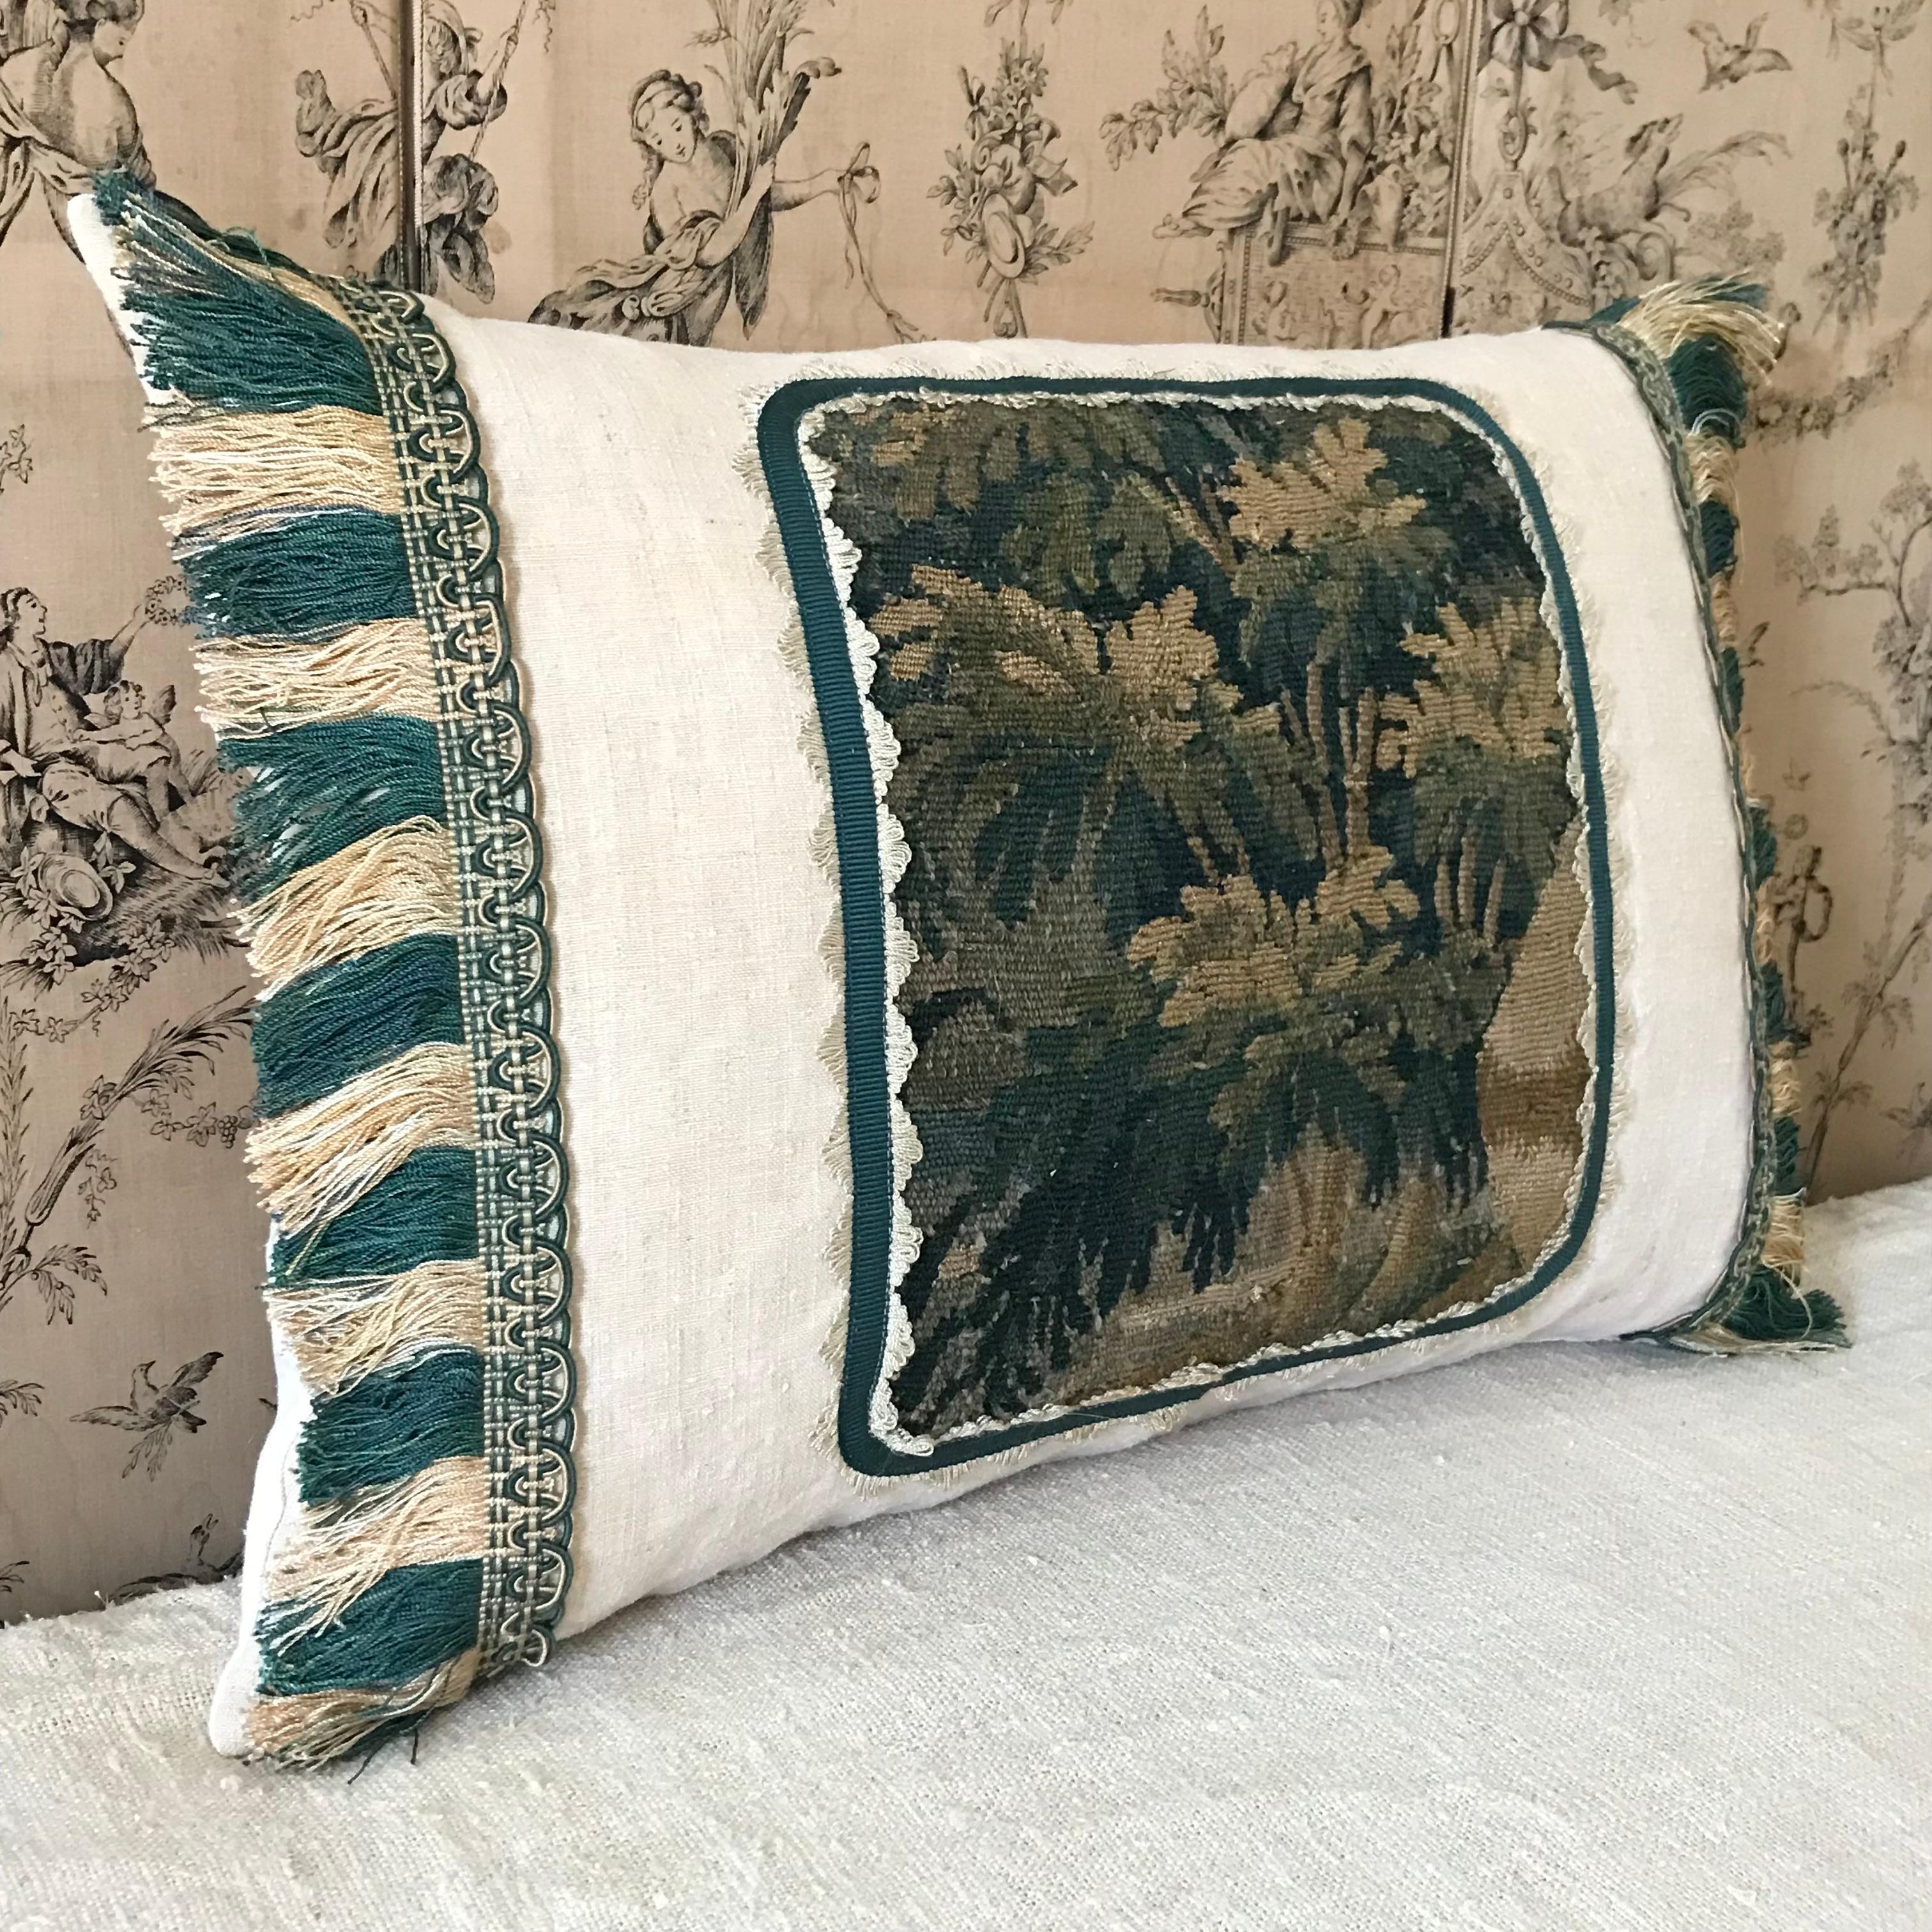 A beautiful 18th century verdure tapestry fragment placed on plain antique French linen and trimmed with Claremont braid and pure silk fringe - plain antique French linen to reverse - hand stitched at bottom - luxurious soft down feather inner pad